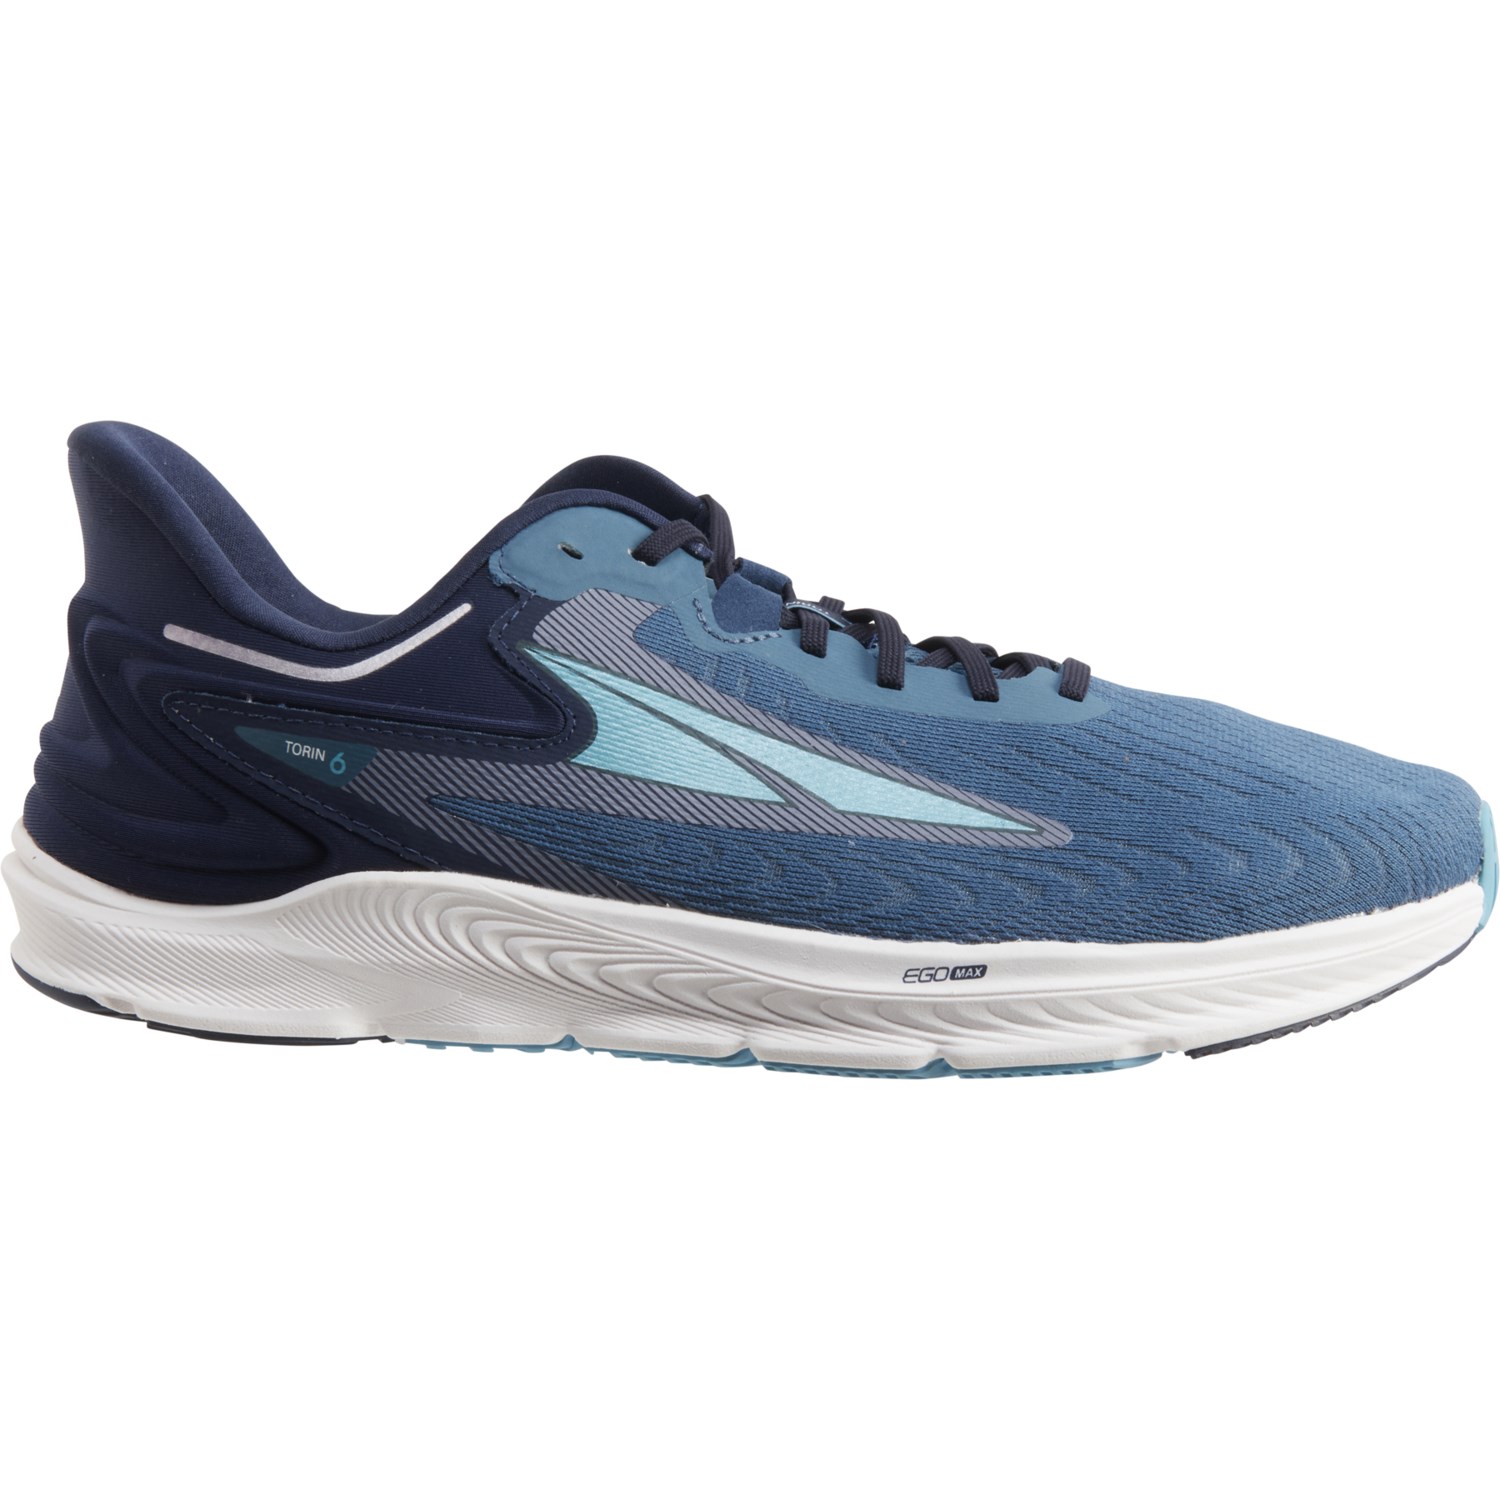 Altra Torin 6 Running Shoes (For Men) - Save 42%